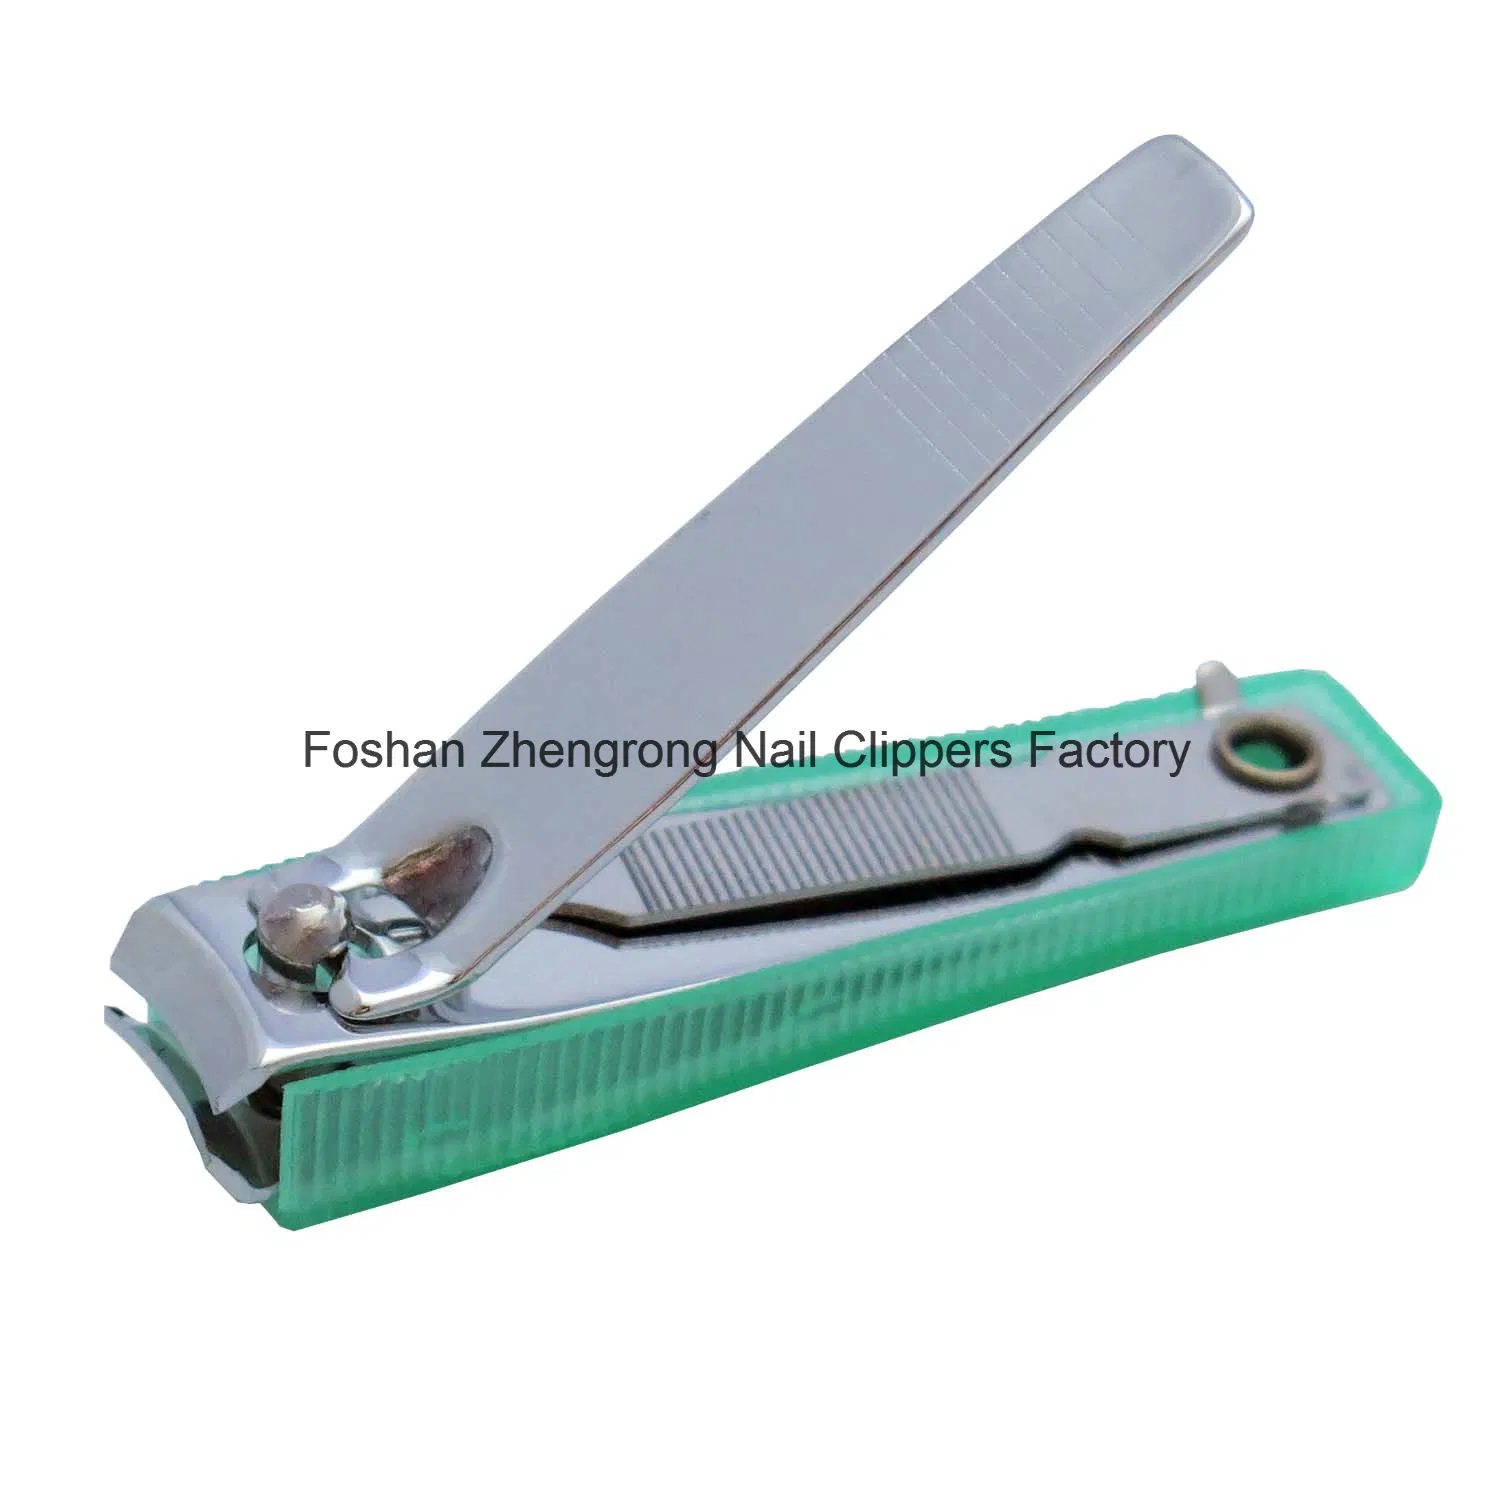 Middle Best-Selling Customized Carbon Steel with Colorful Plastic Cover Nail Clipper Nail File (608BS)